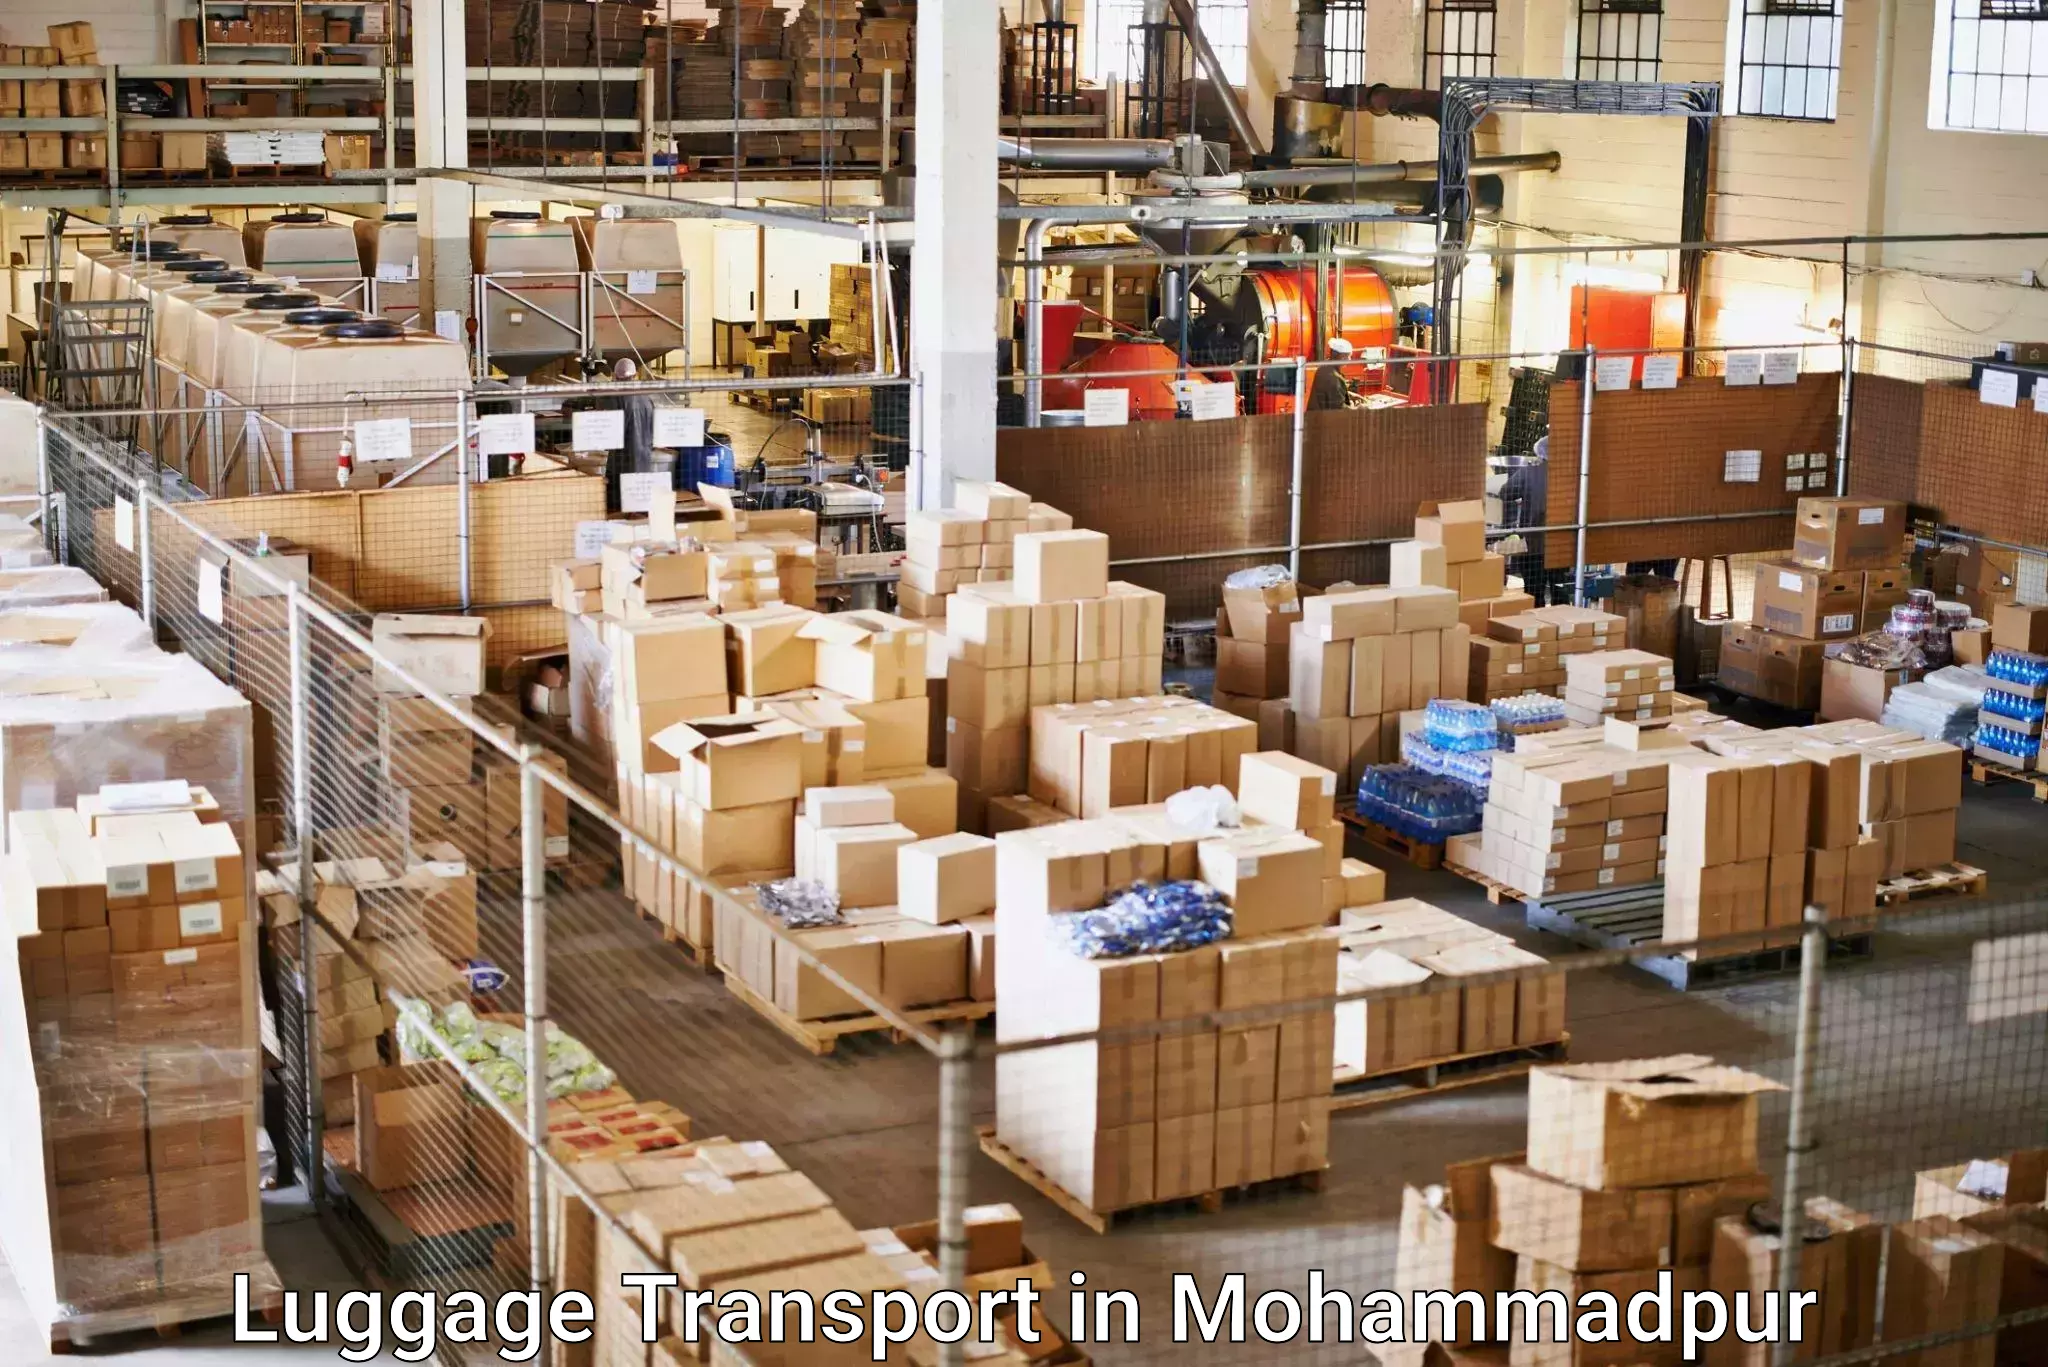 Baggage relocation service in Mohammadpur